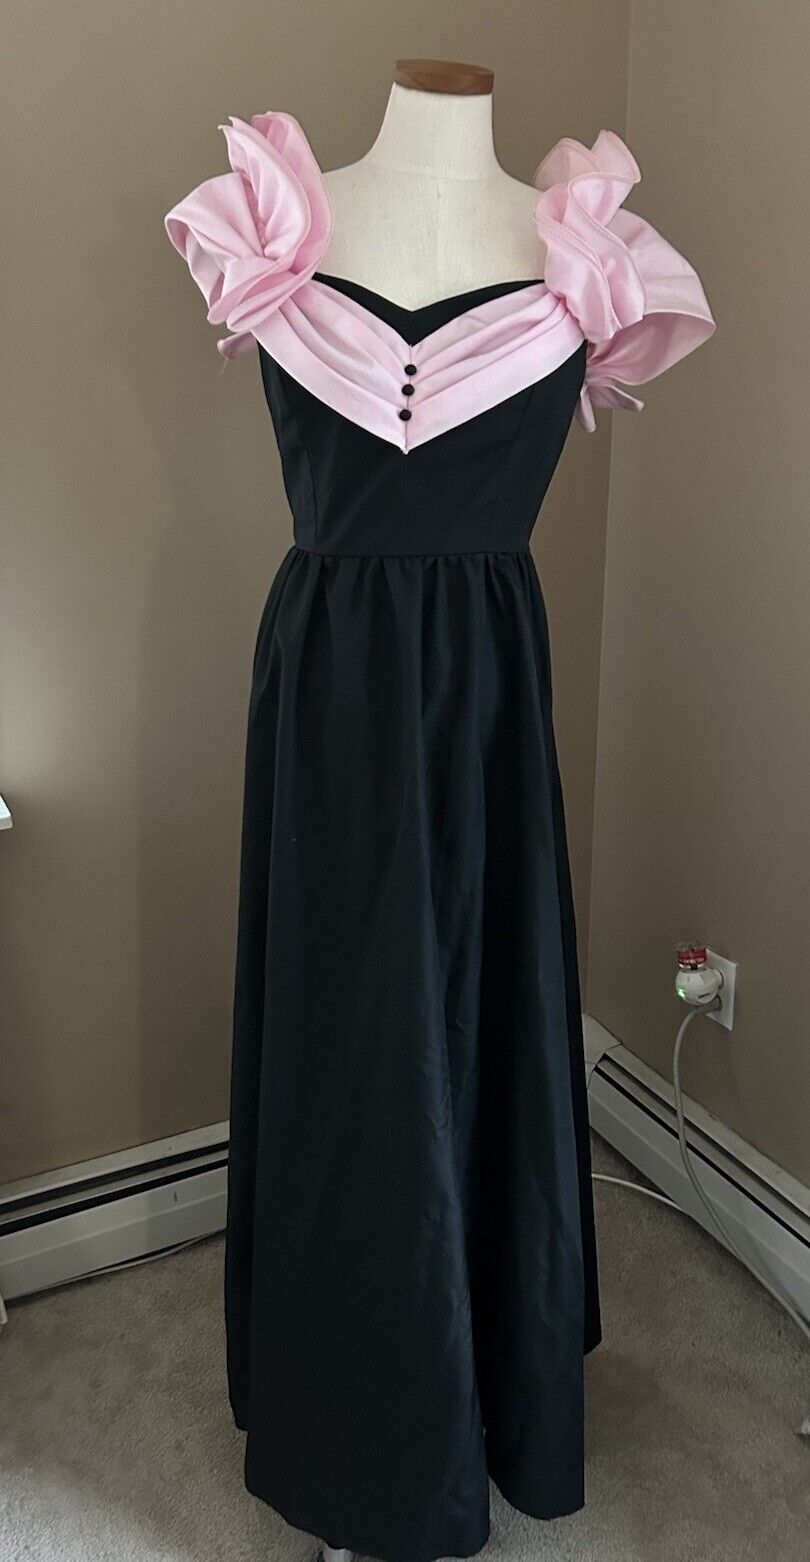 Vintage 1980s Black And Pink Ruffle Prom Dress - image 6